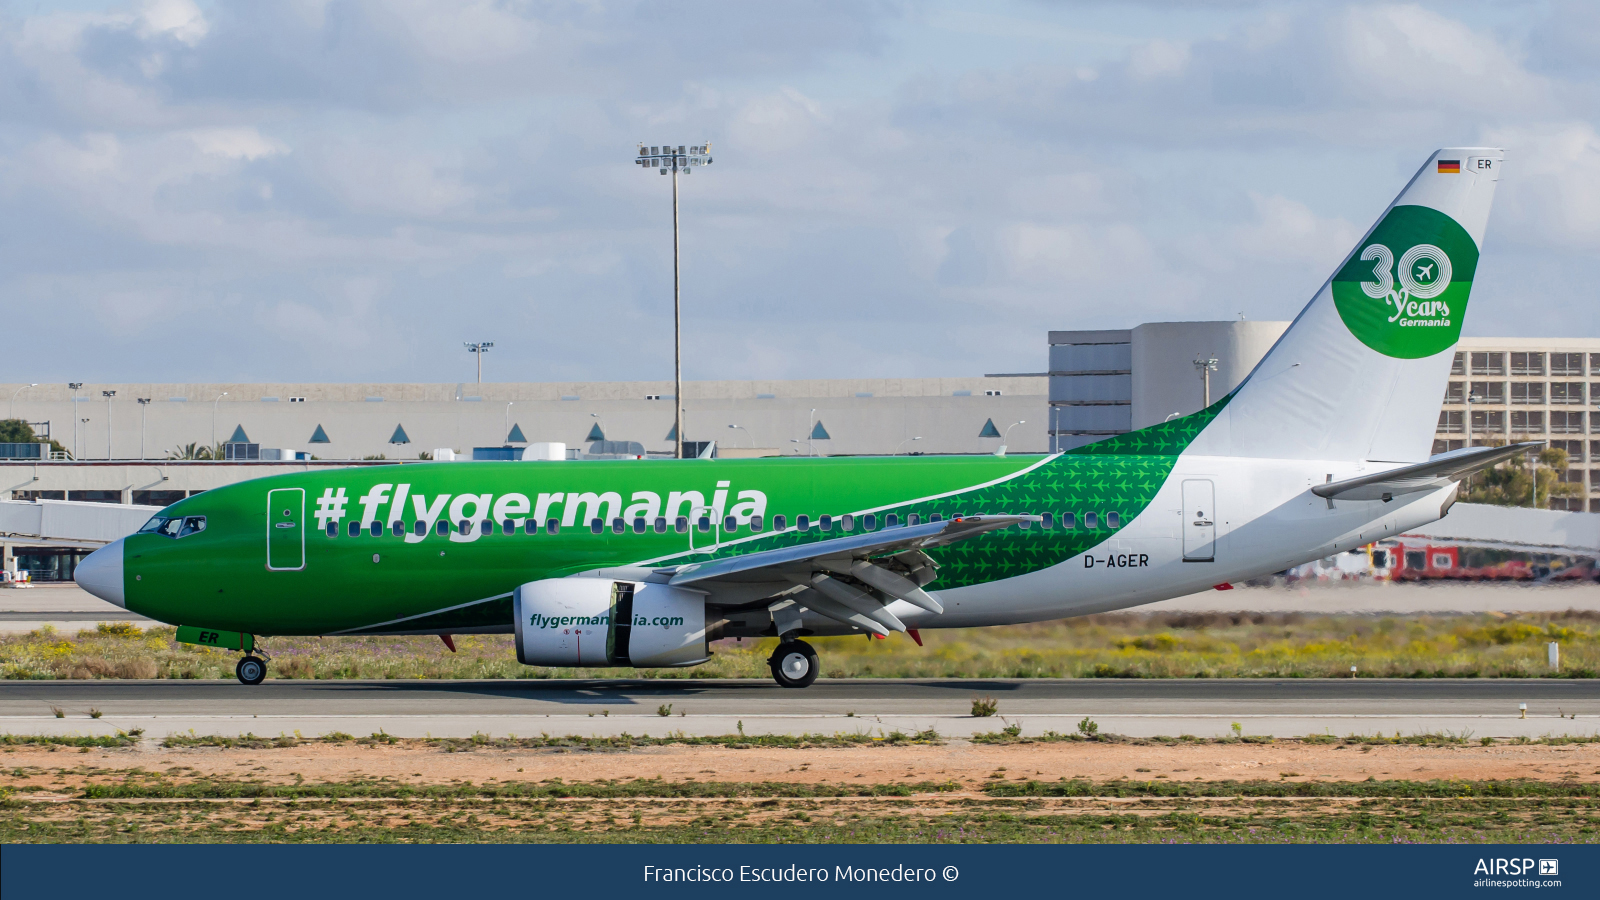 Germania  Boeing 737-700  D-AGER